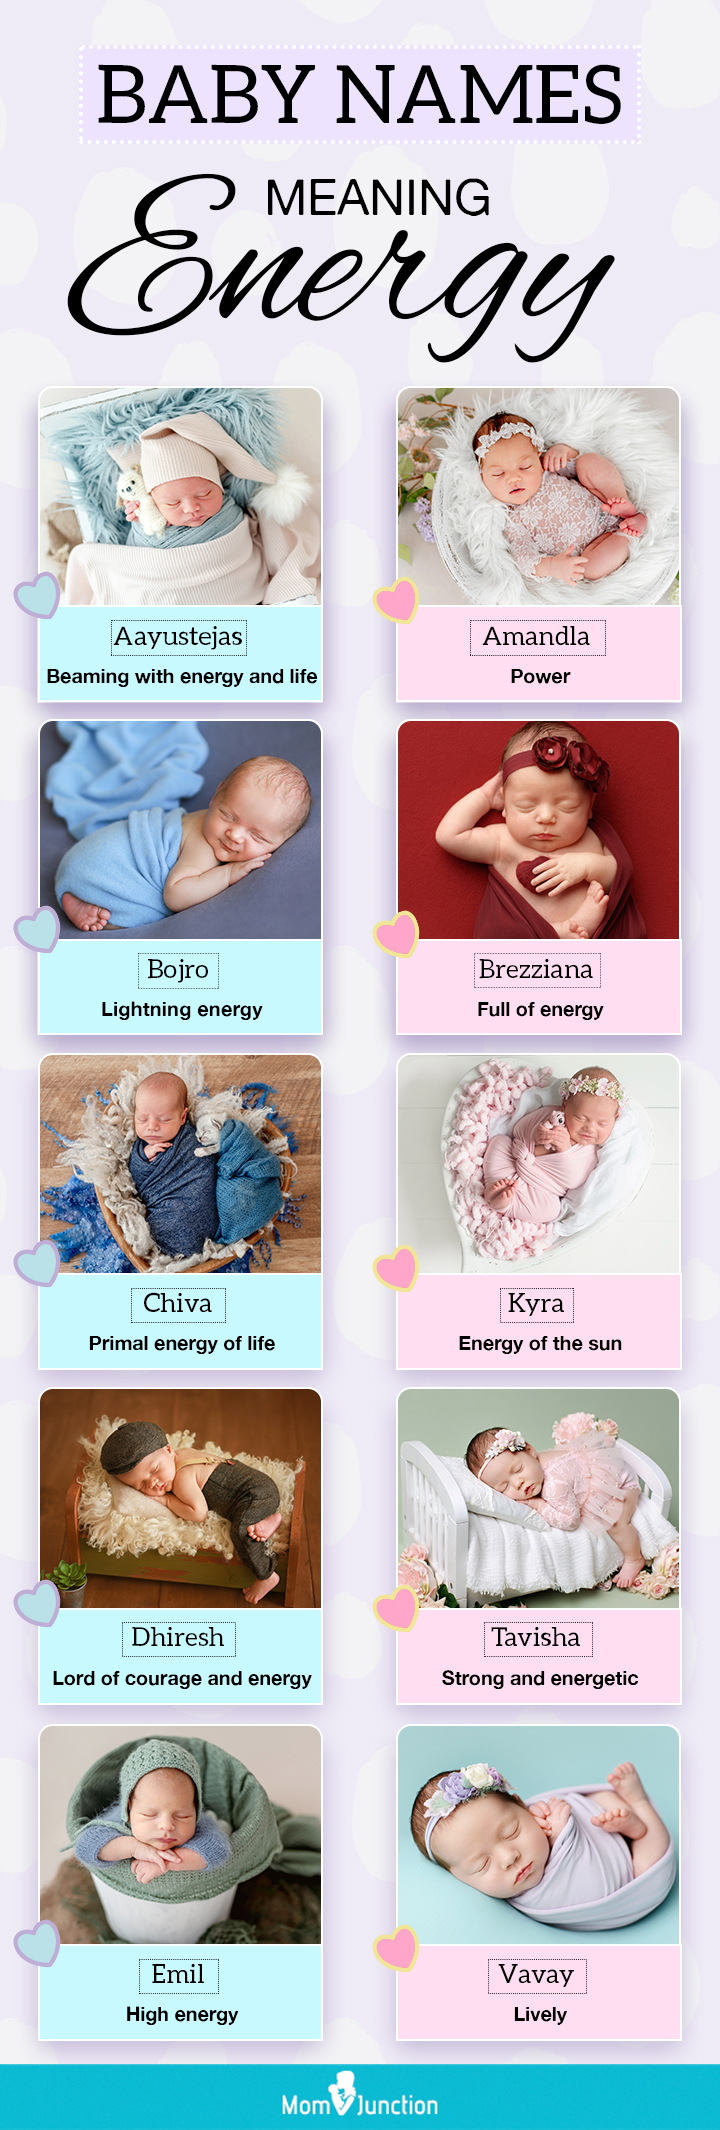 baby names means energy [Infographic]